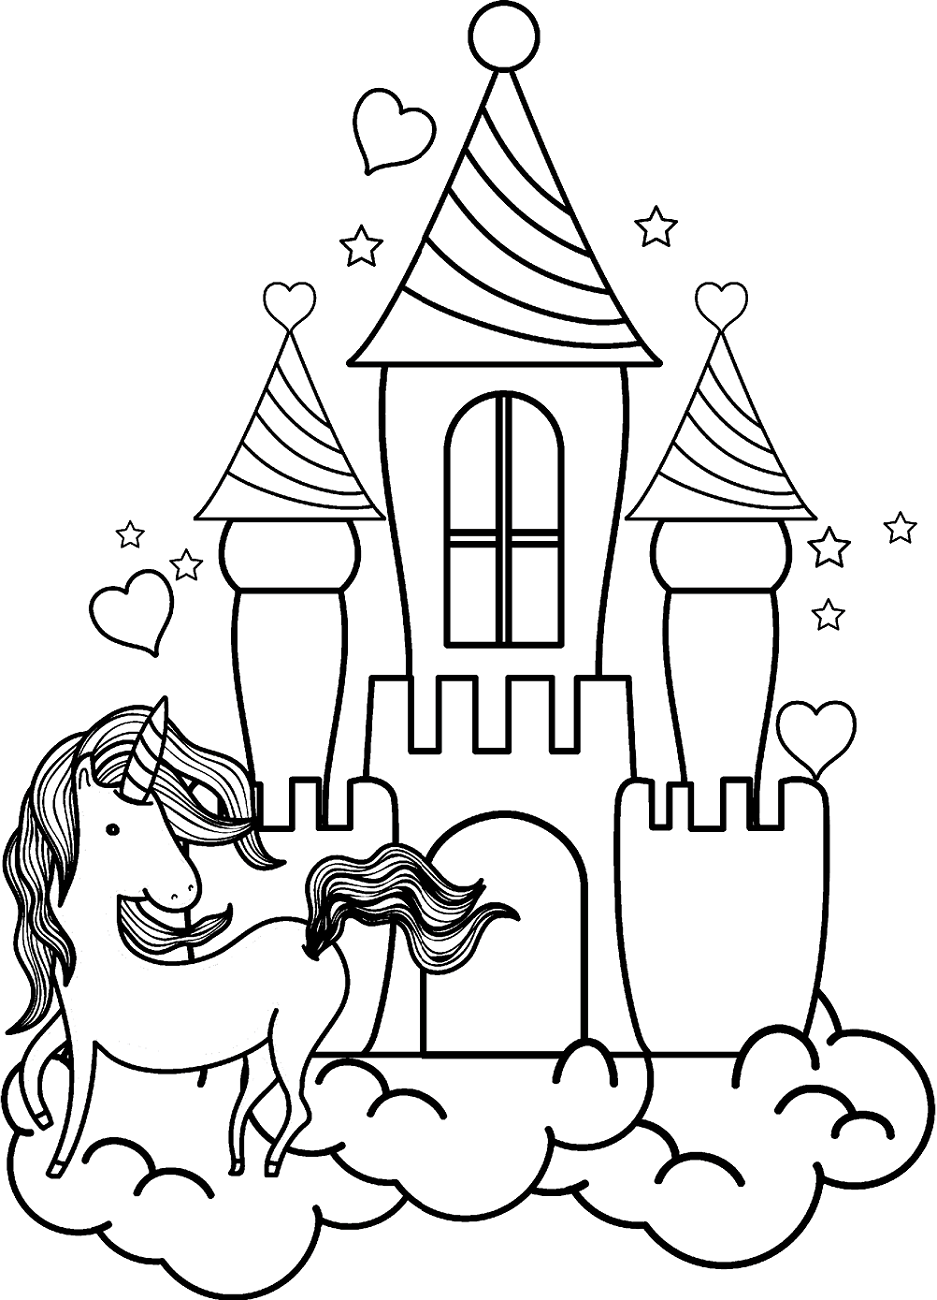 Unicorn And The Castle Coloring Page